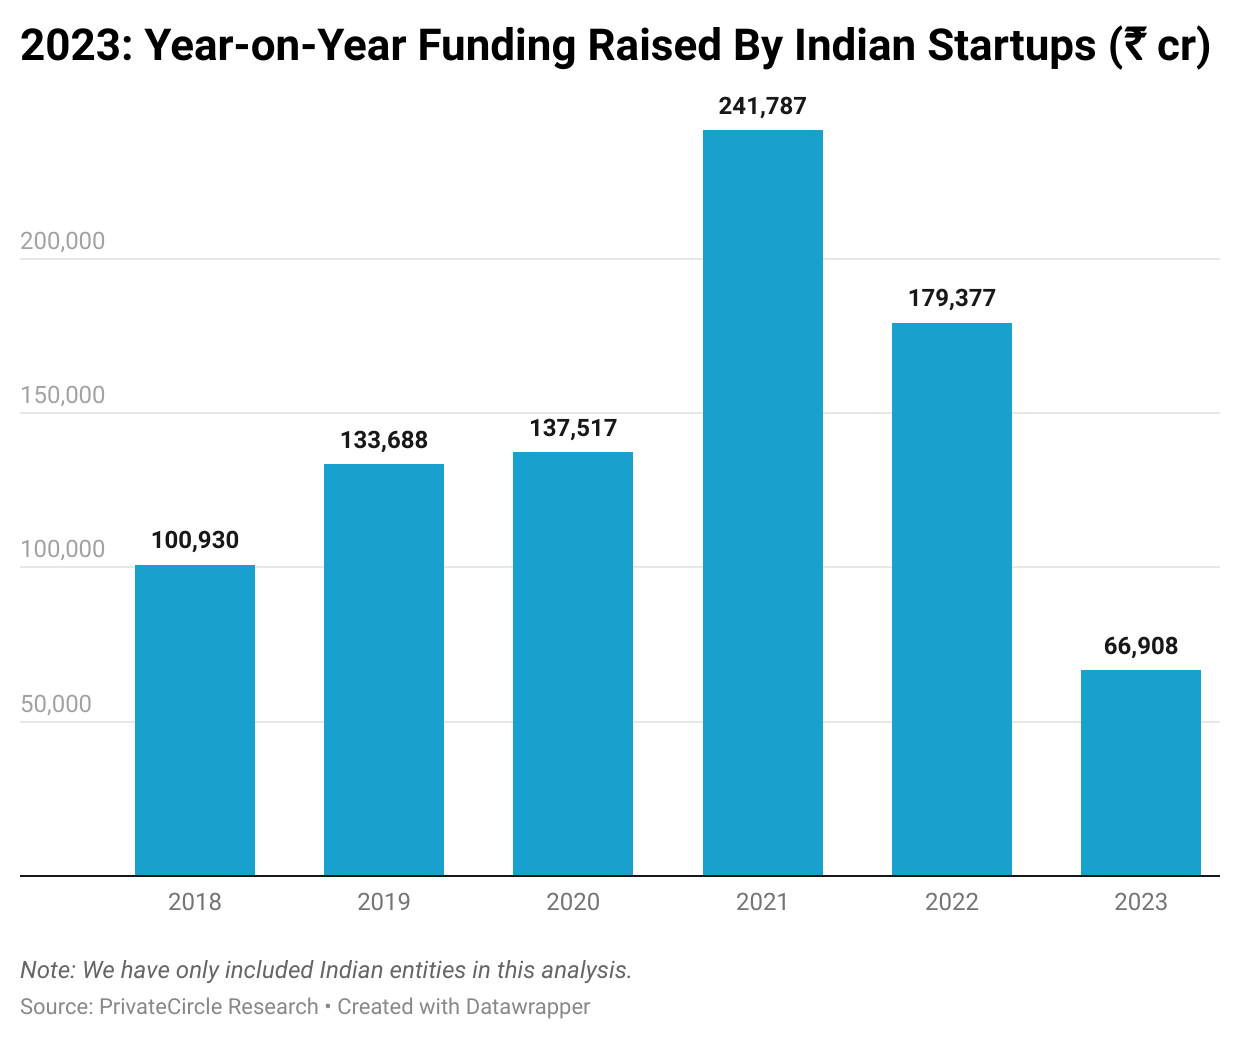 2023: Year-on-Year Funding Raised By Indian Startups (₹ cr).

A total of ₹66,908 cr was raised in funding by Indian startups in 2023 as compared to ₹241,787 cr raised in 2021 fundraising peak.